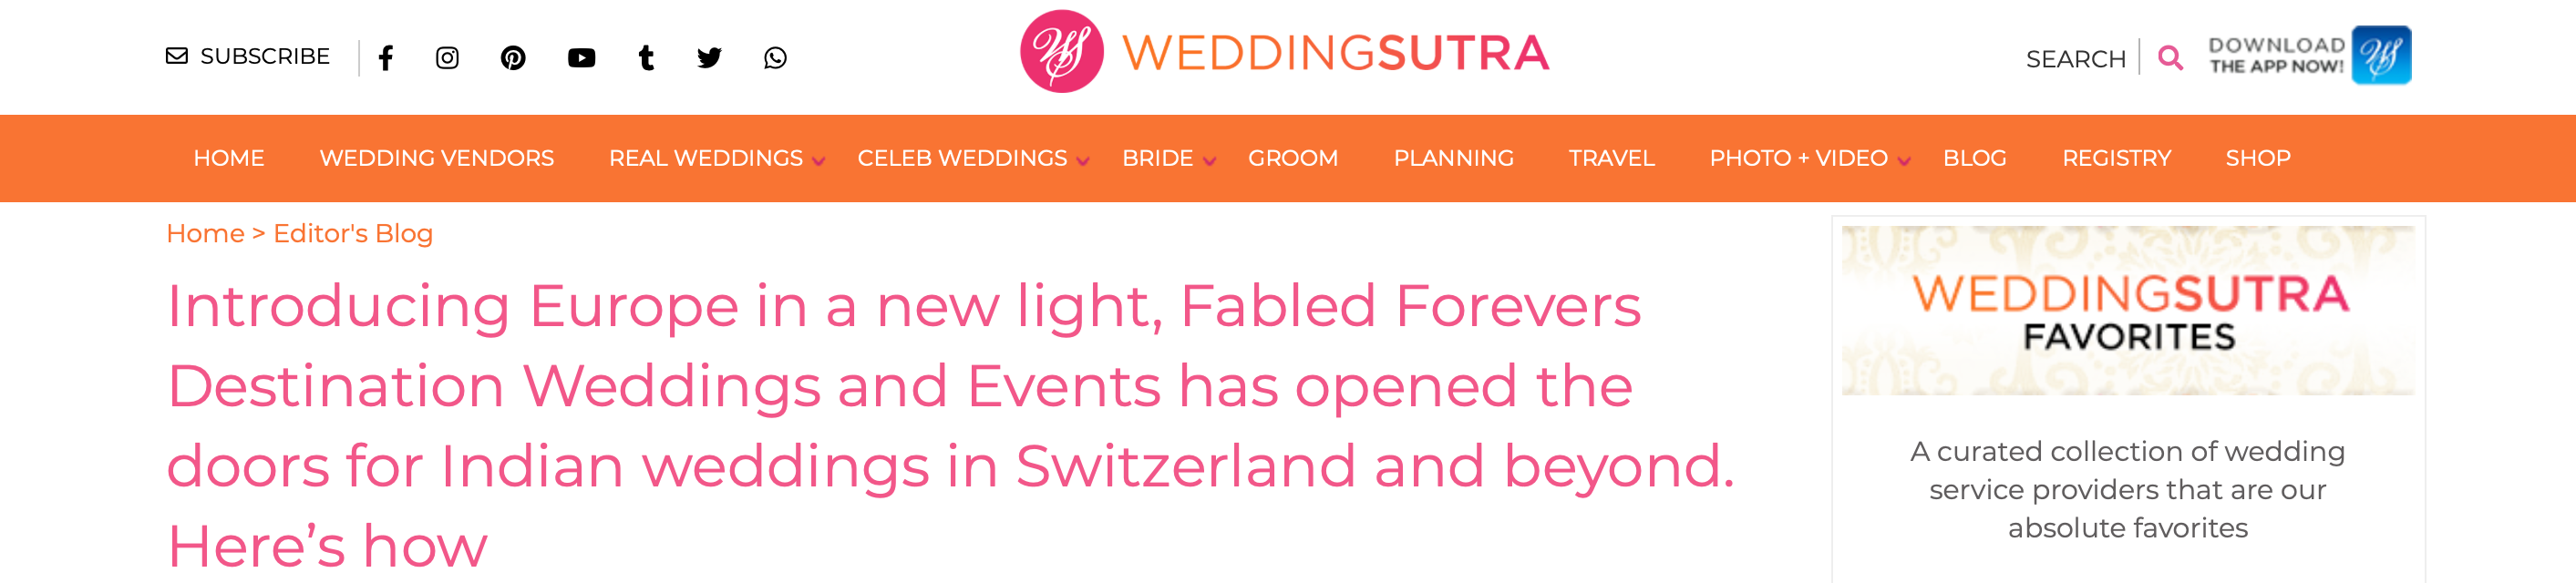 Wedding Sutra, recommends Fabled Forevers for wedding planning